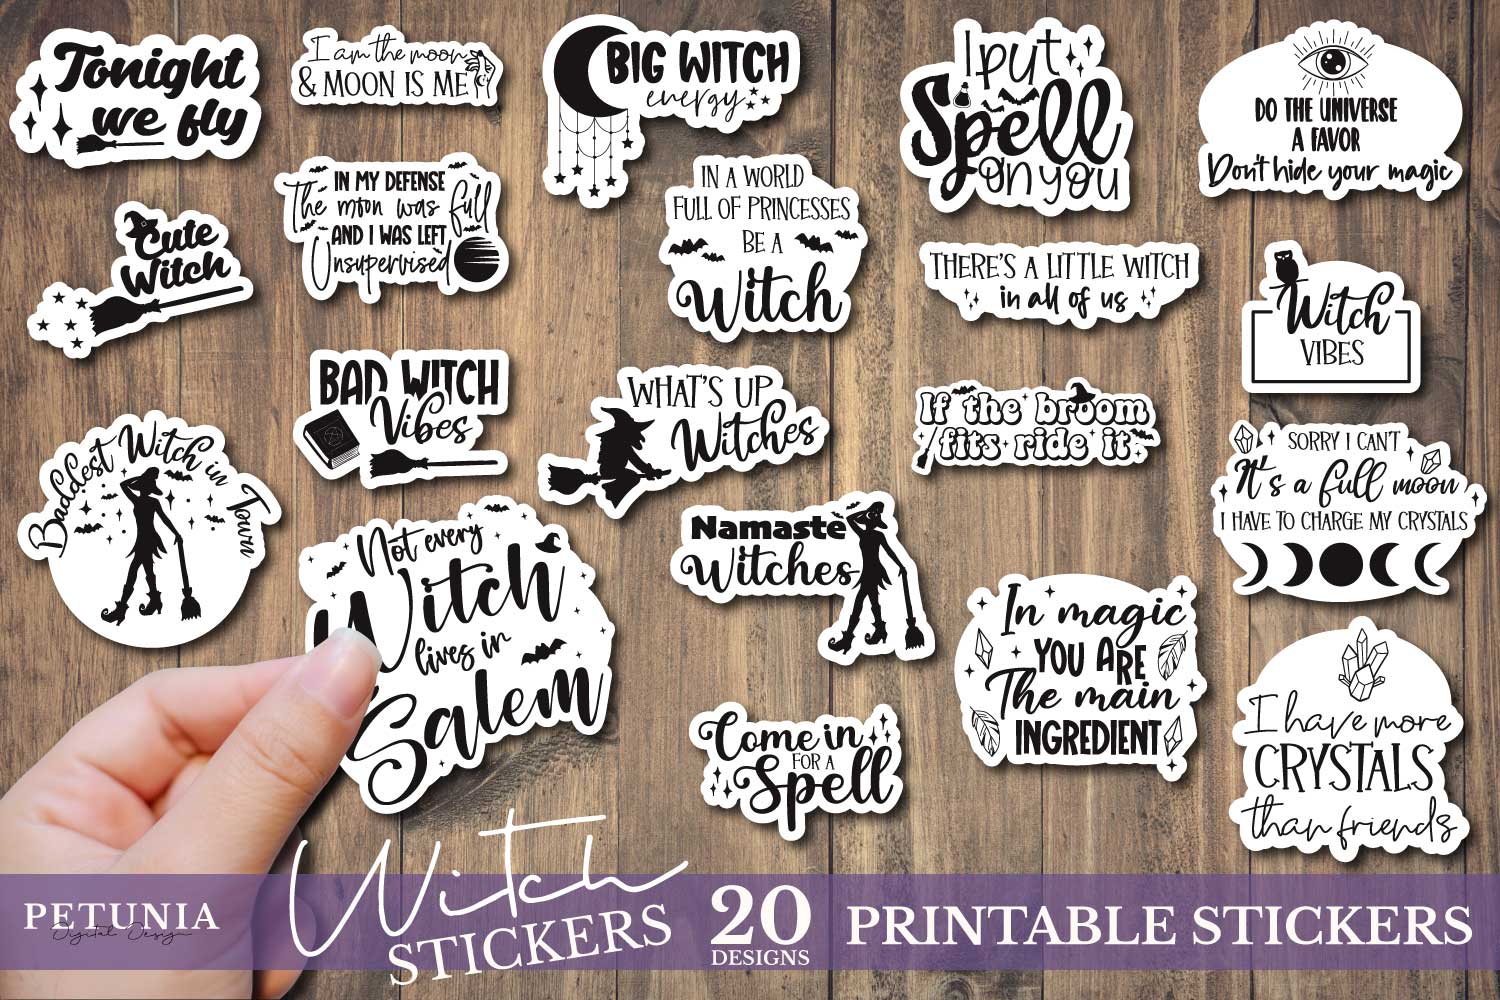 Witchy stickers png bundle